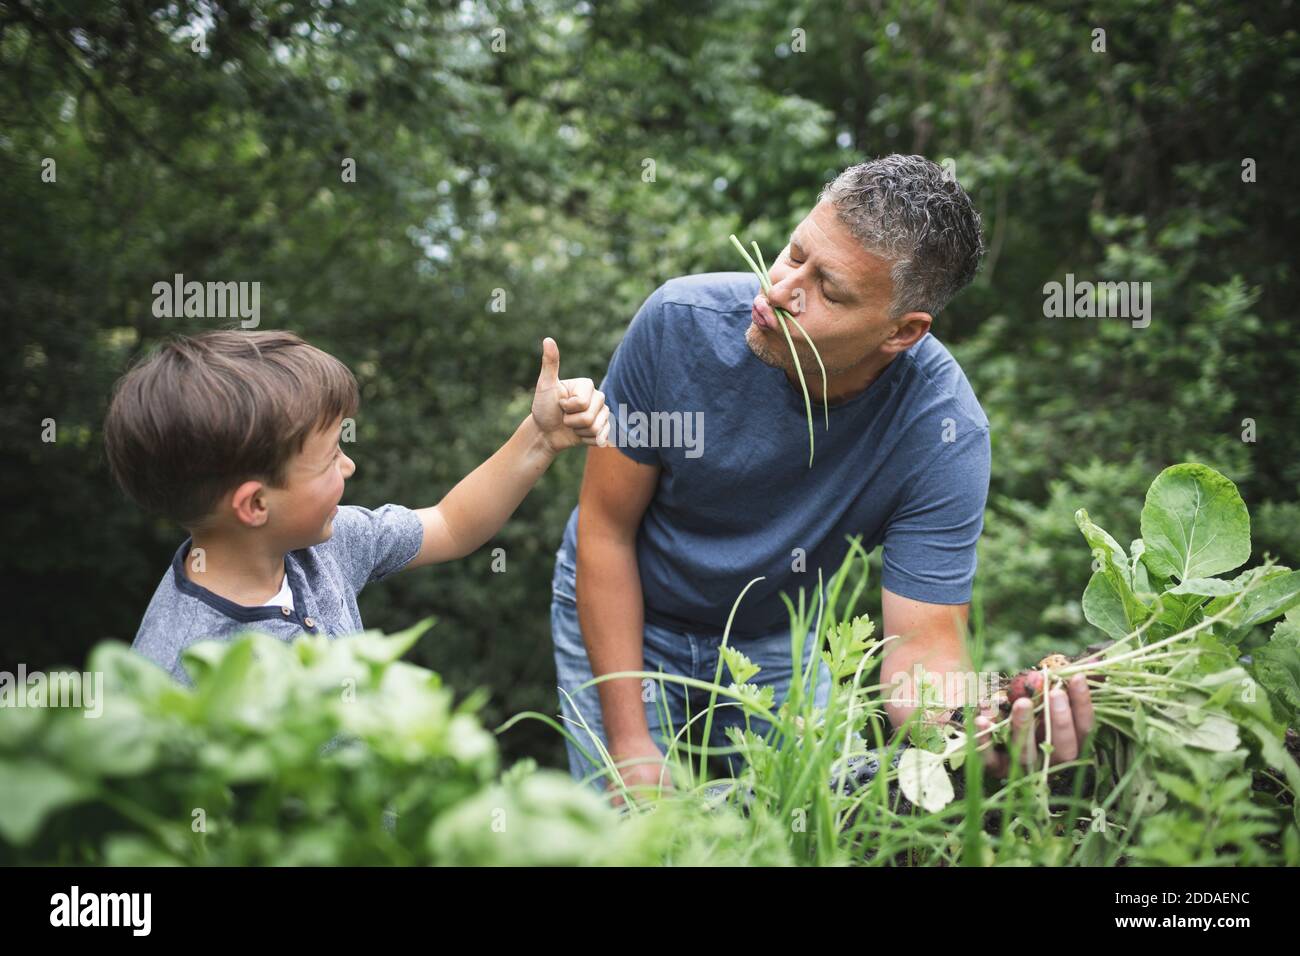 Boy showing thumbs up to playful father while harvesting vegetables at garden Stock Photo